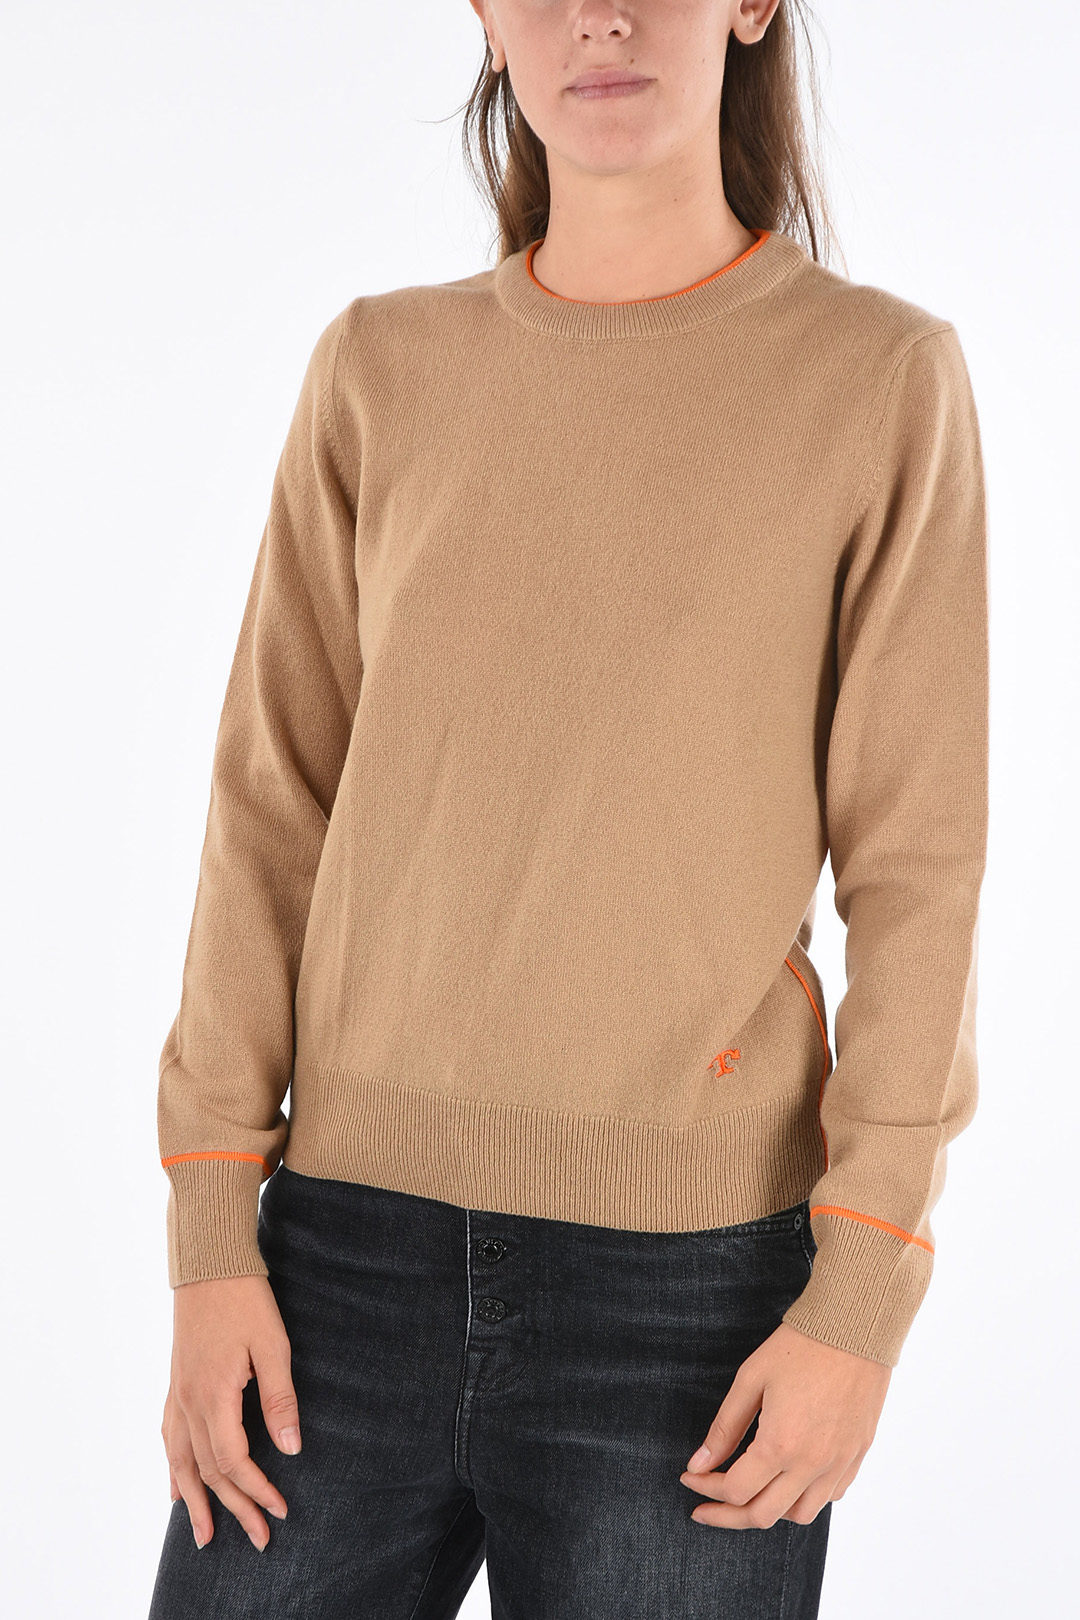 Tory Burch Cashmere Crewneck Sweater women - Glamood Outlet